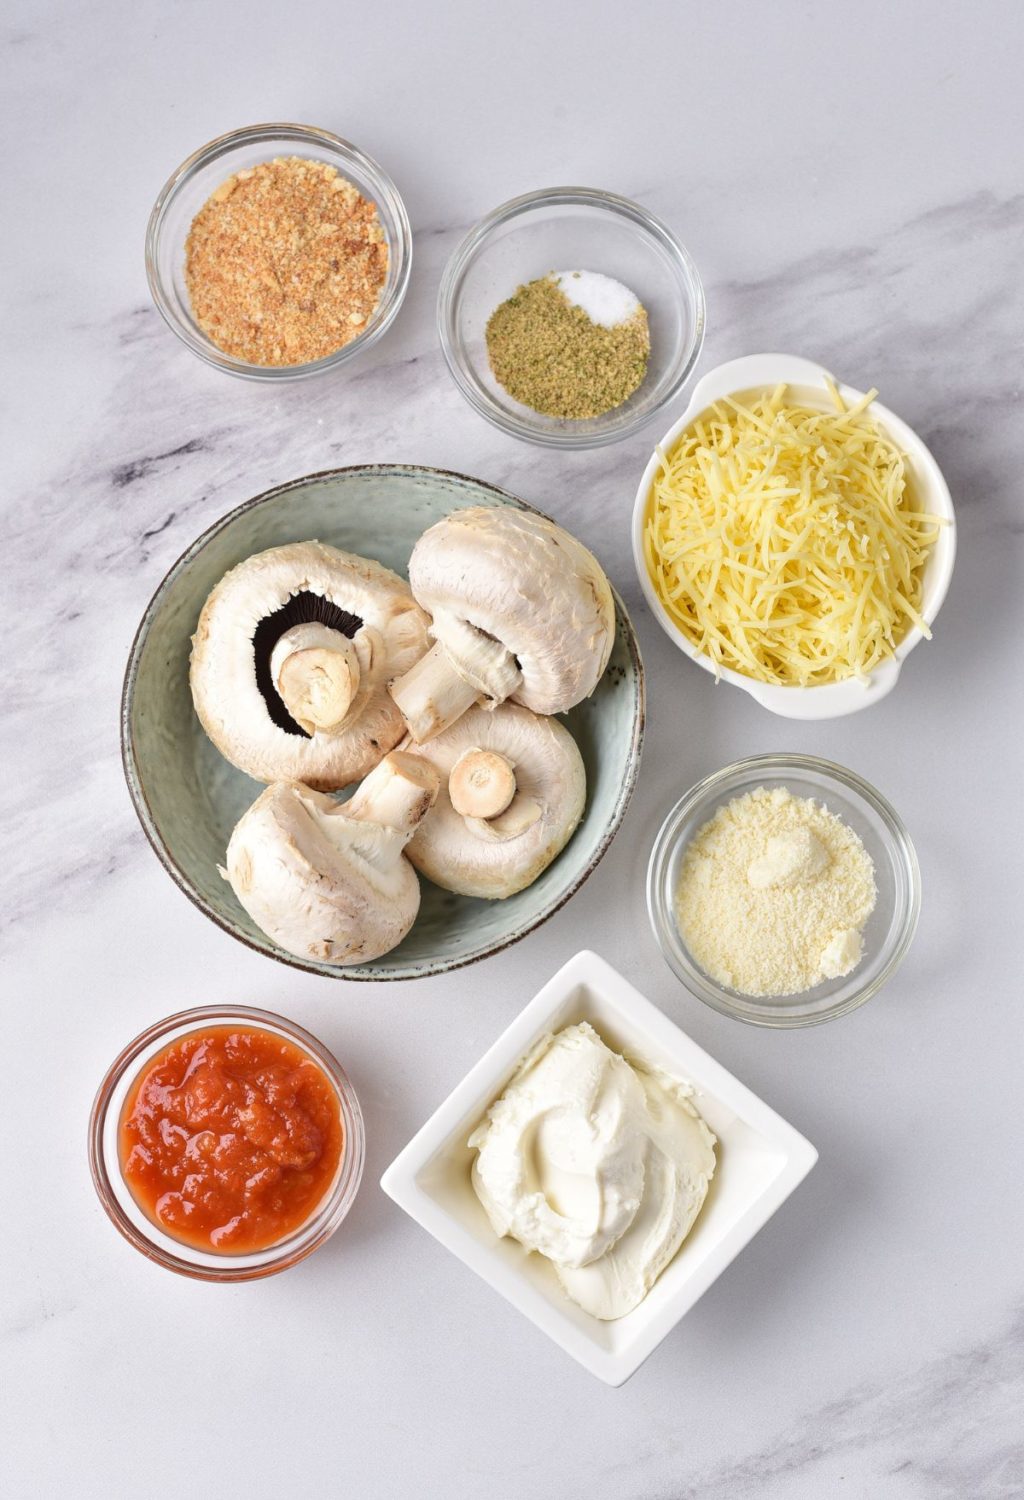 The ingredients for a mushroom risotto.